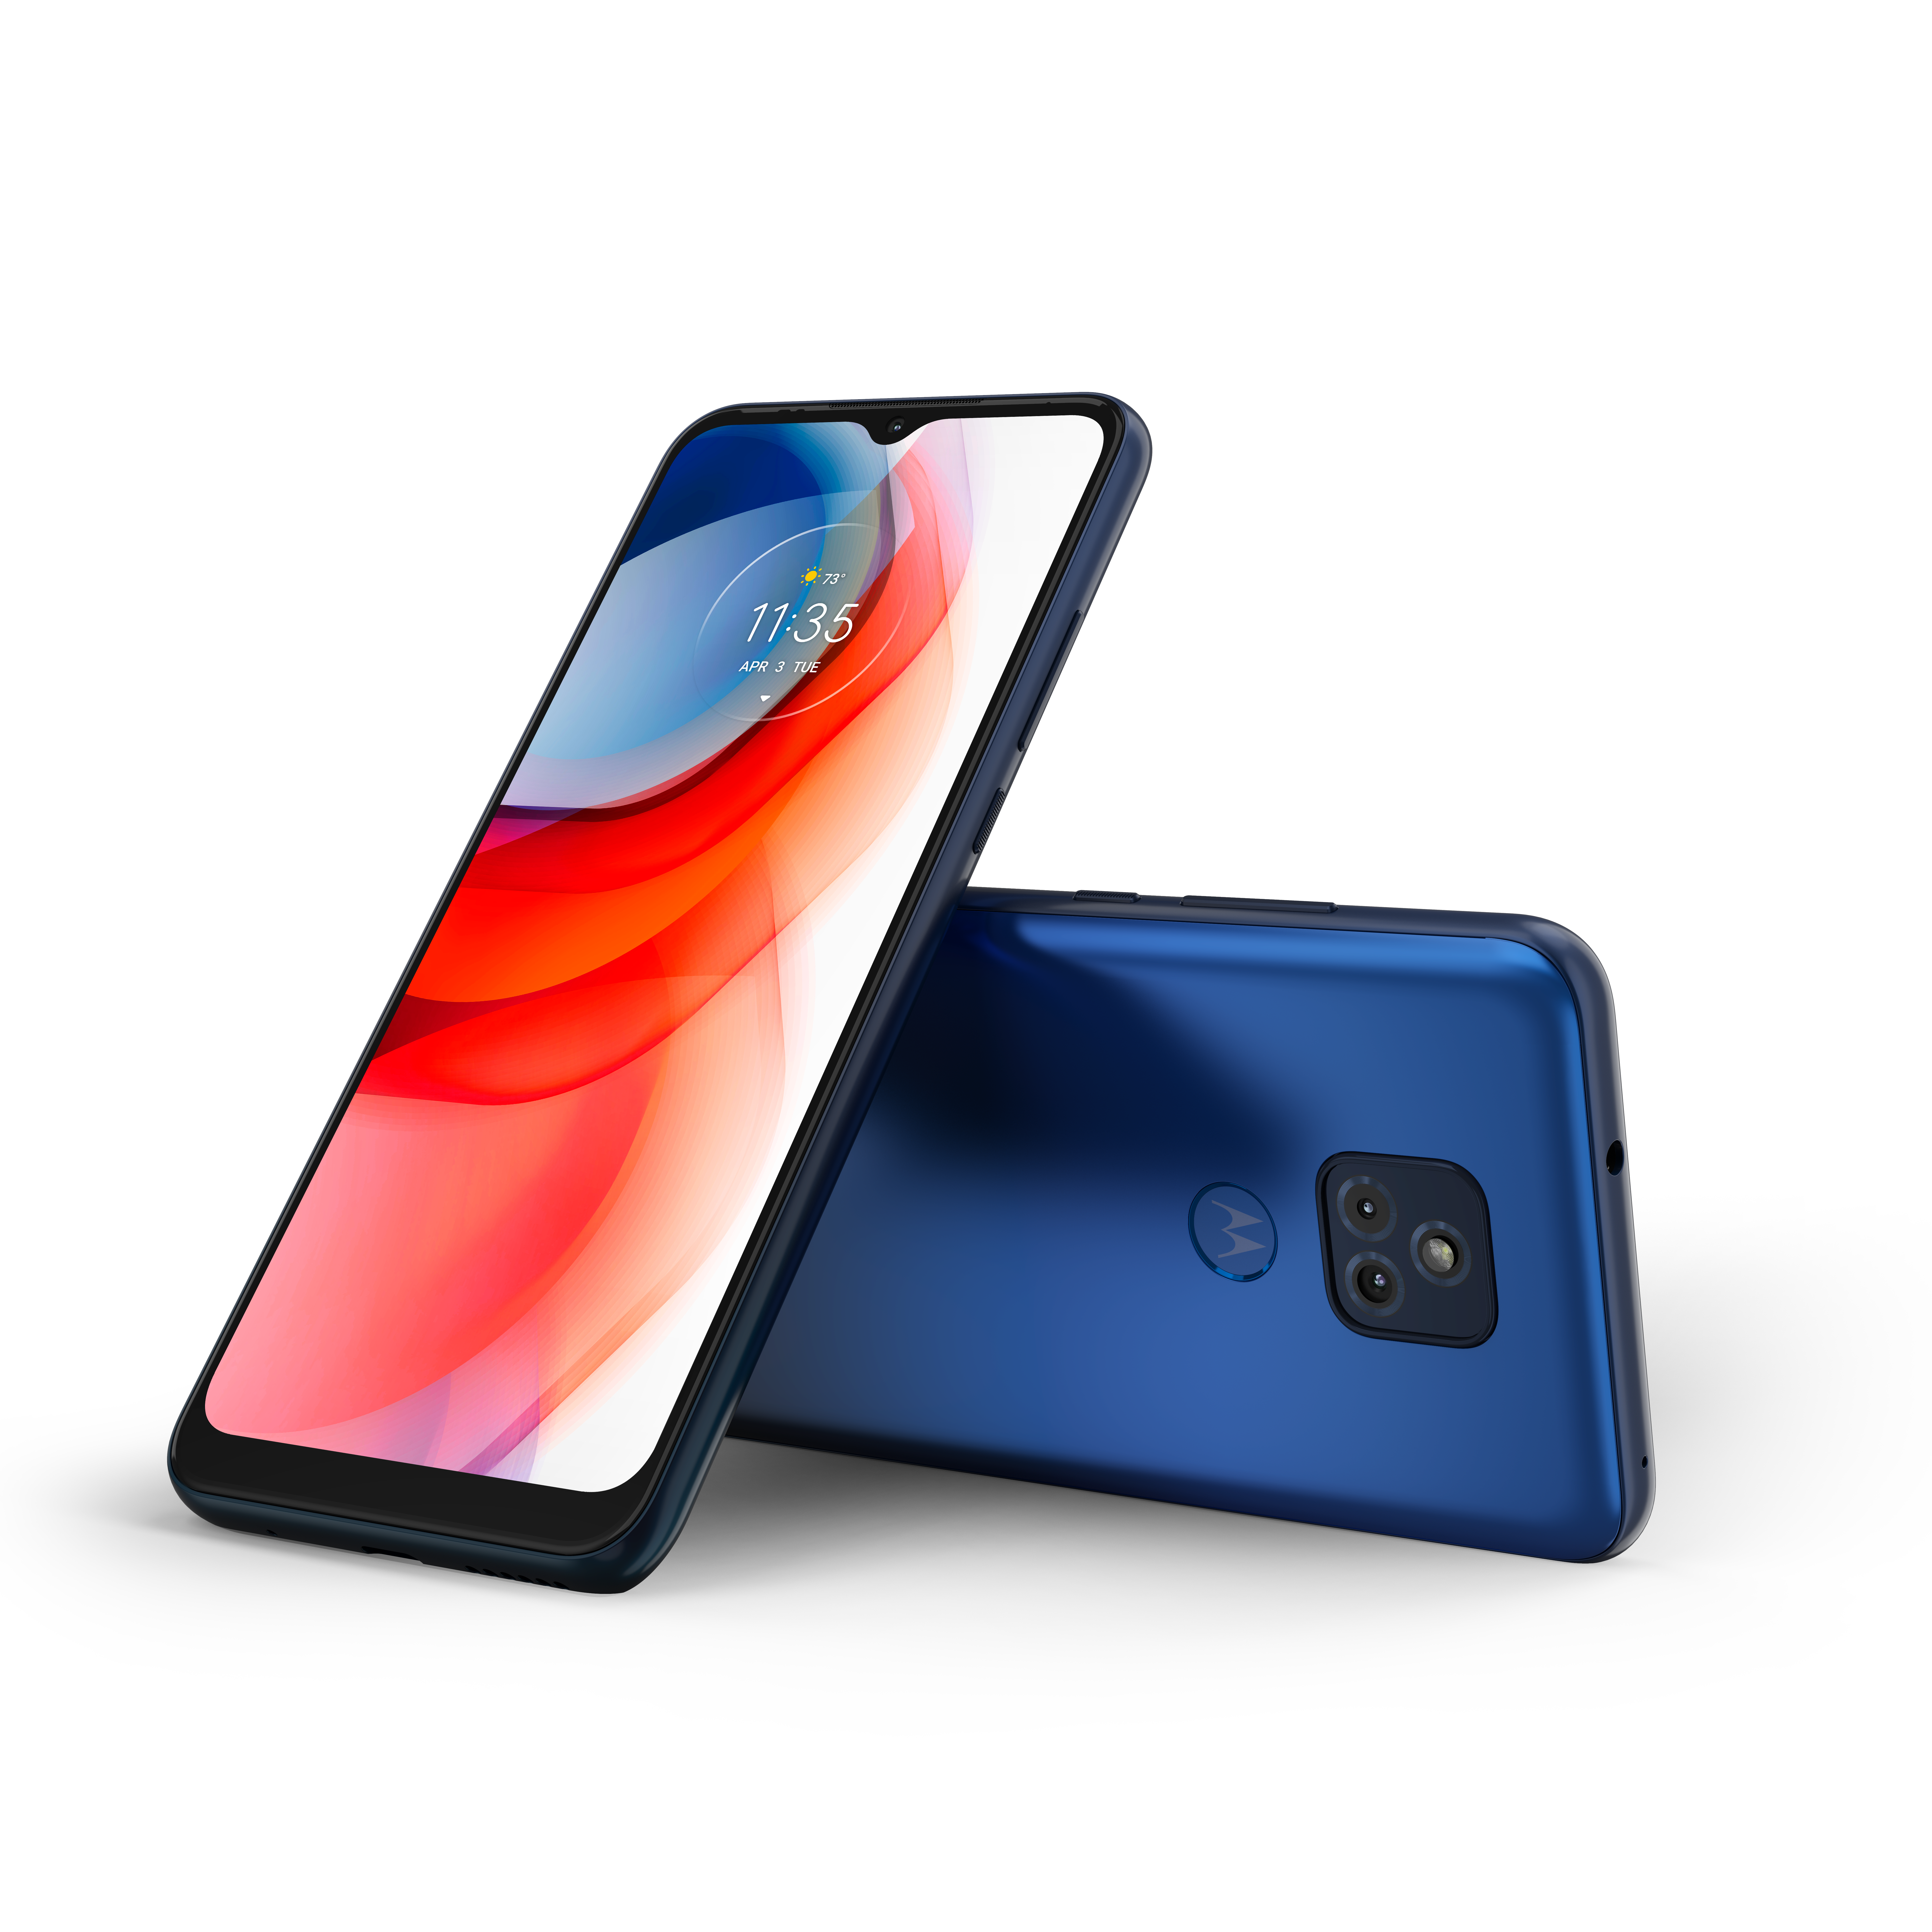 The new Moto G Play - Motorola launches three new G-series phones, plus their cheapest 5G model yet